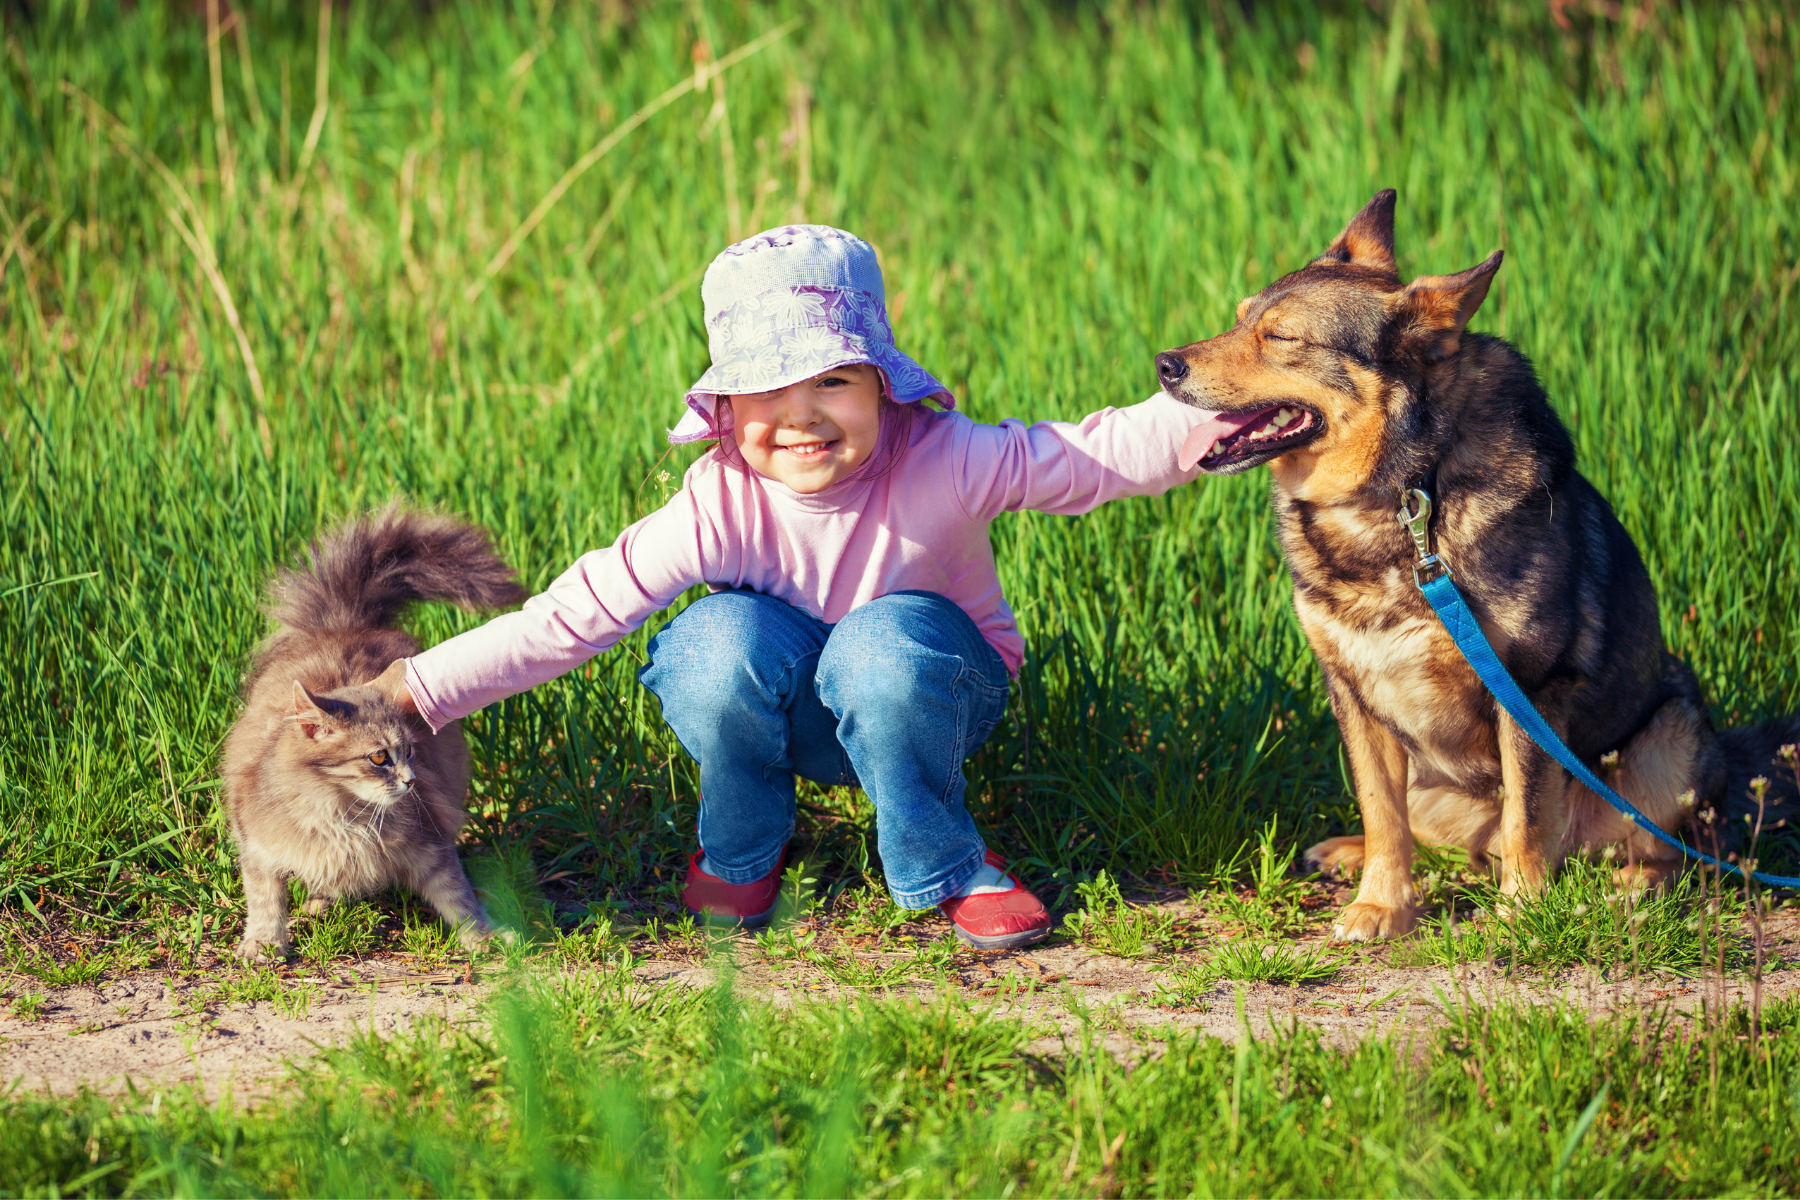 young kid wearing a hat squatting in the grass holding onto a dog and a cat